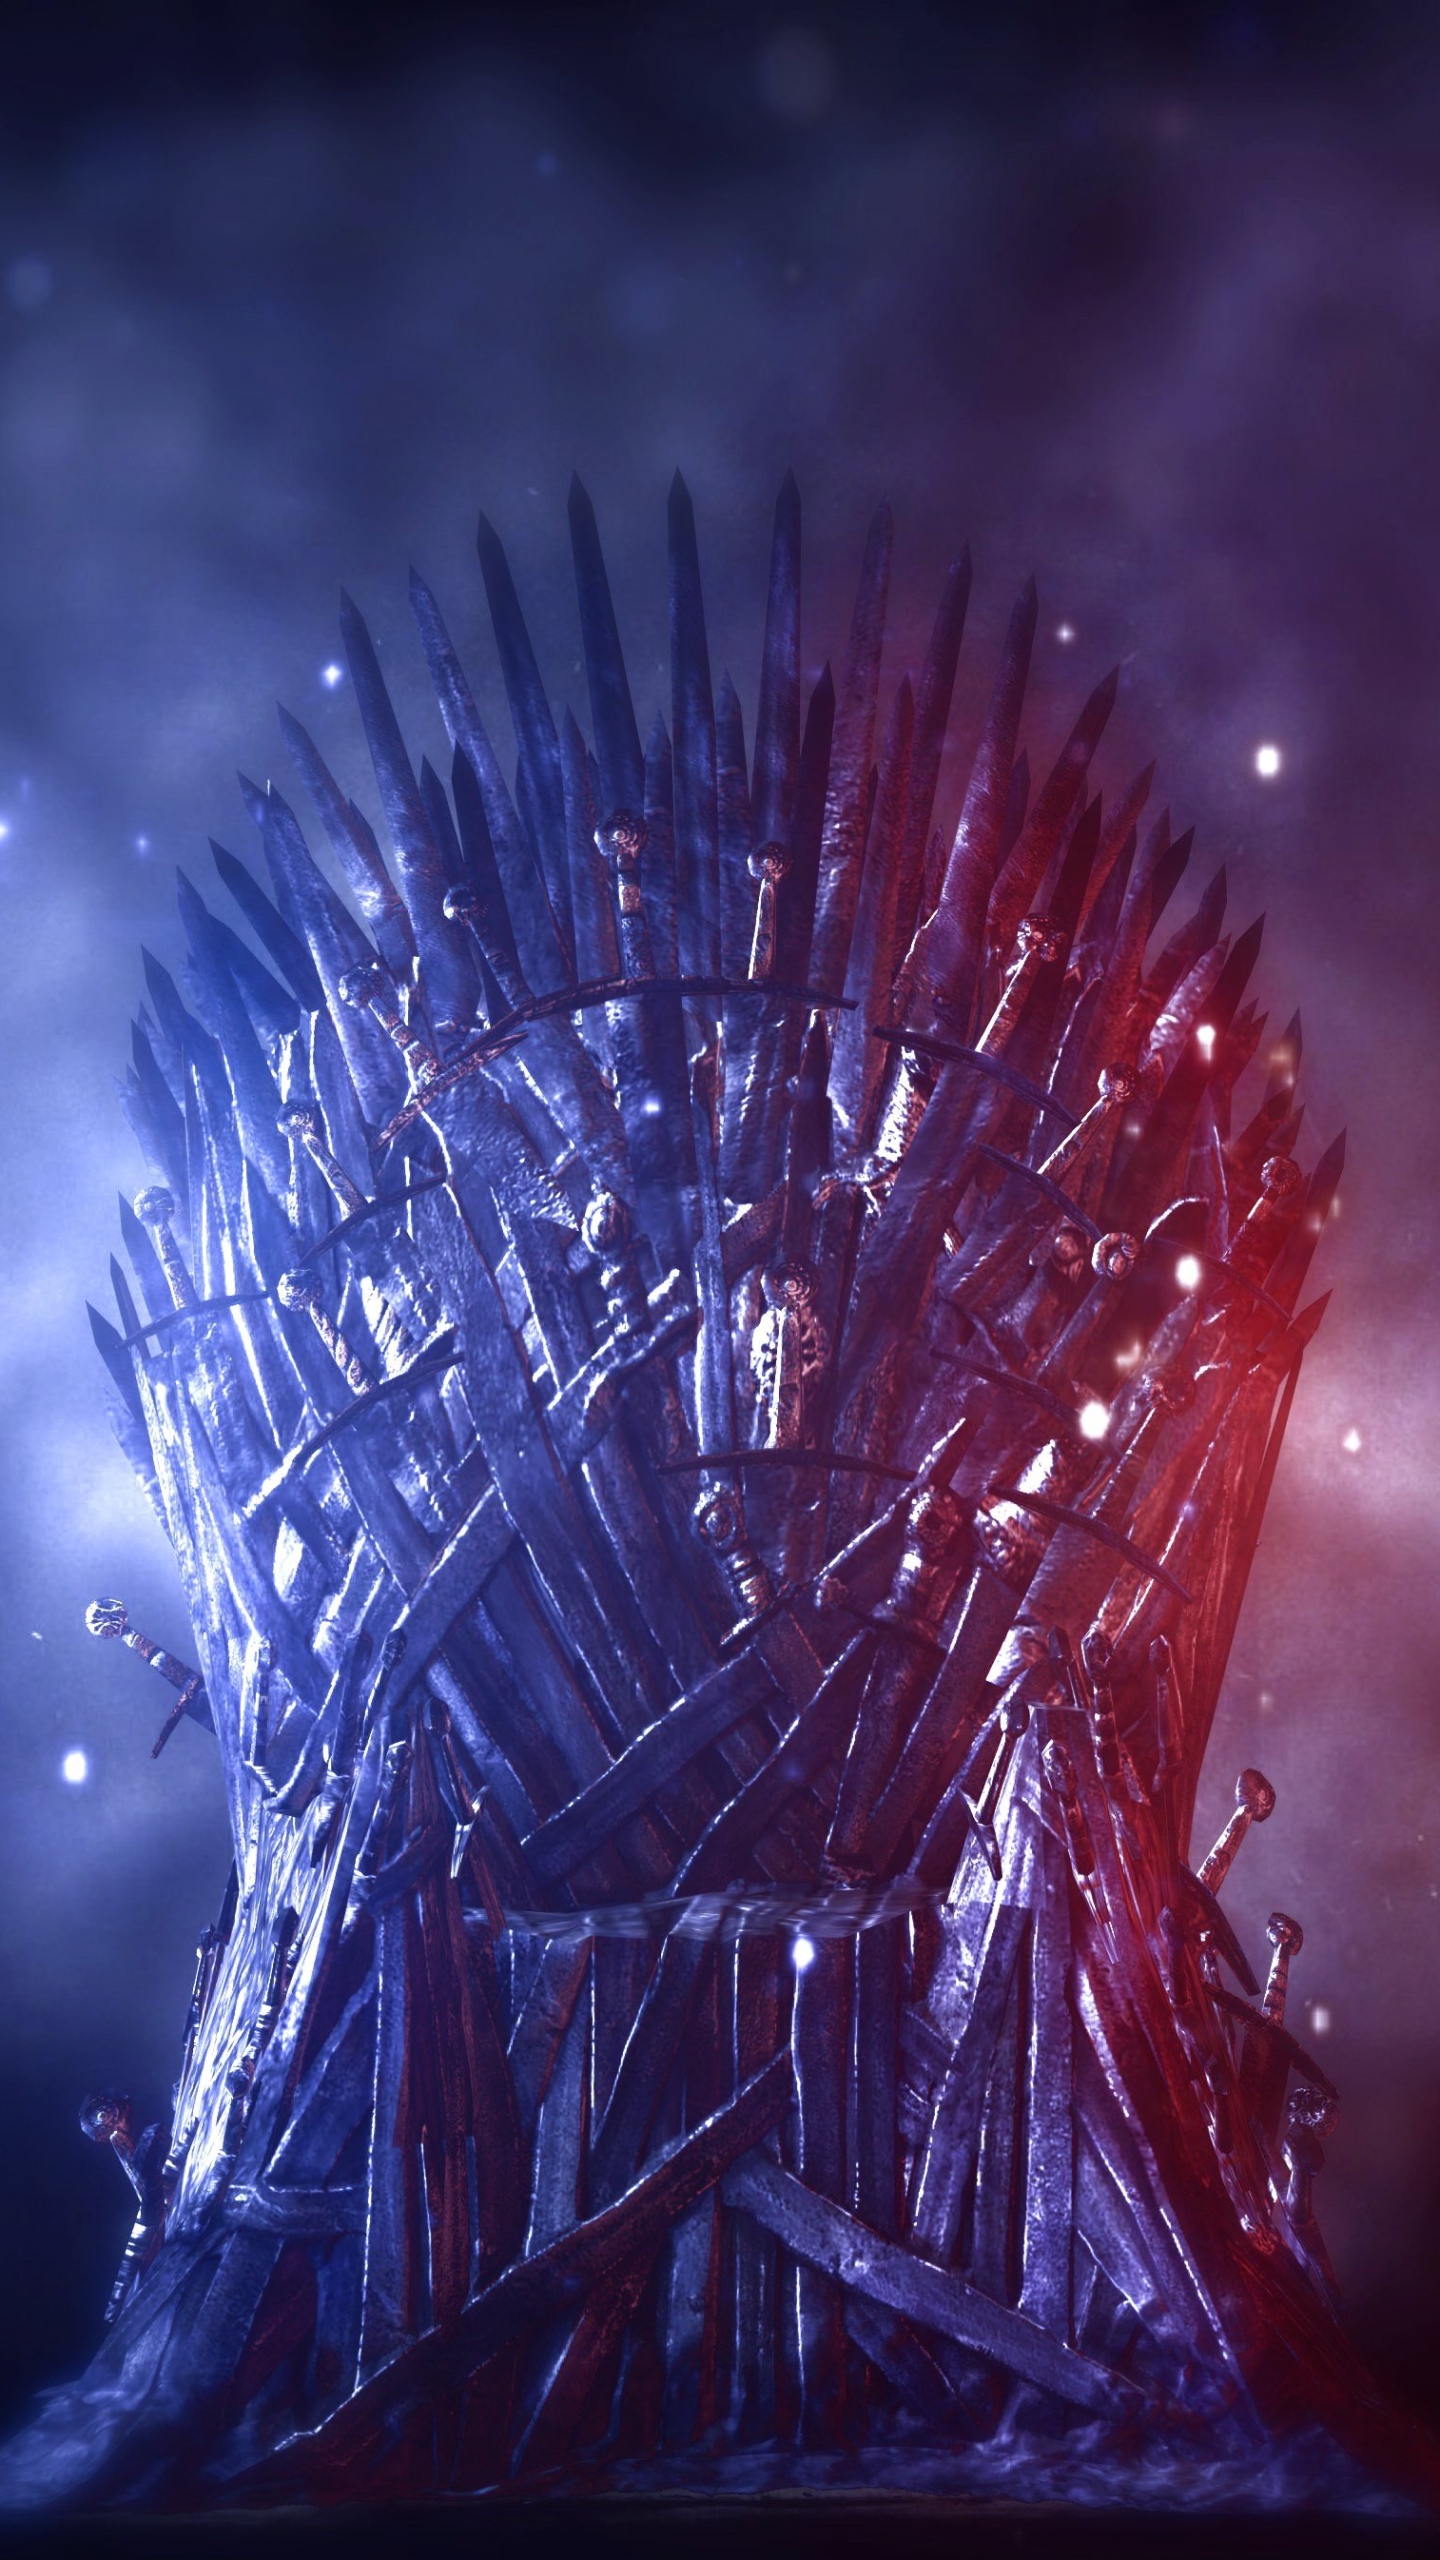 tv show, game of thrones, a song of ice and fire, throne, iron throne Aesthetic wallpaper